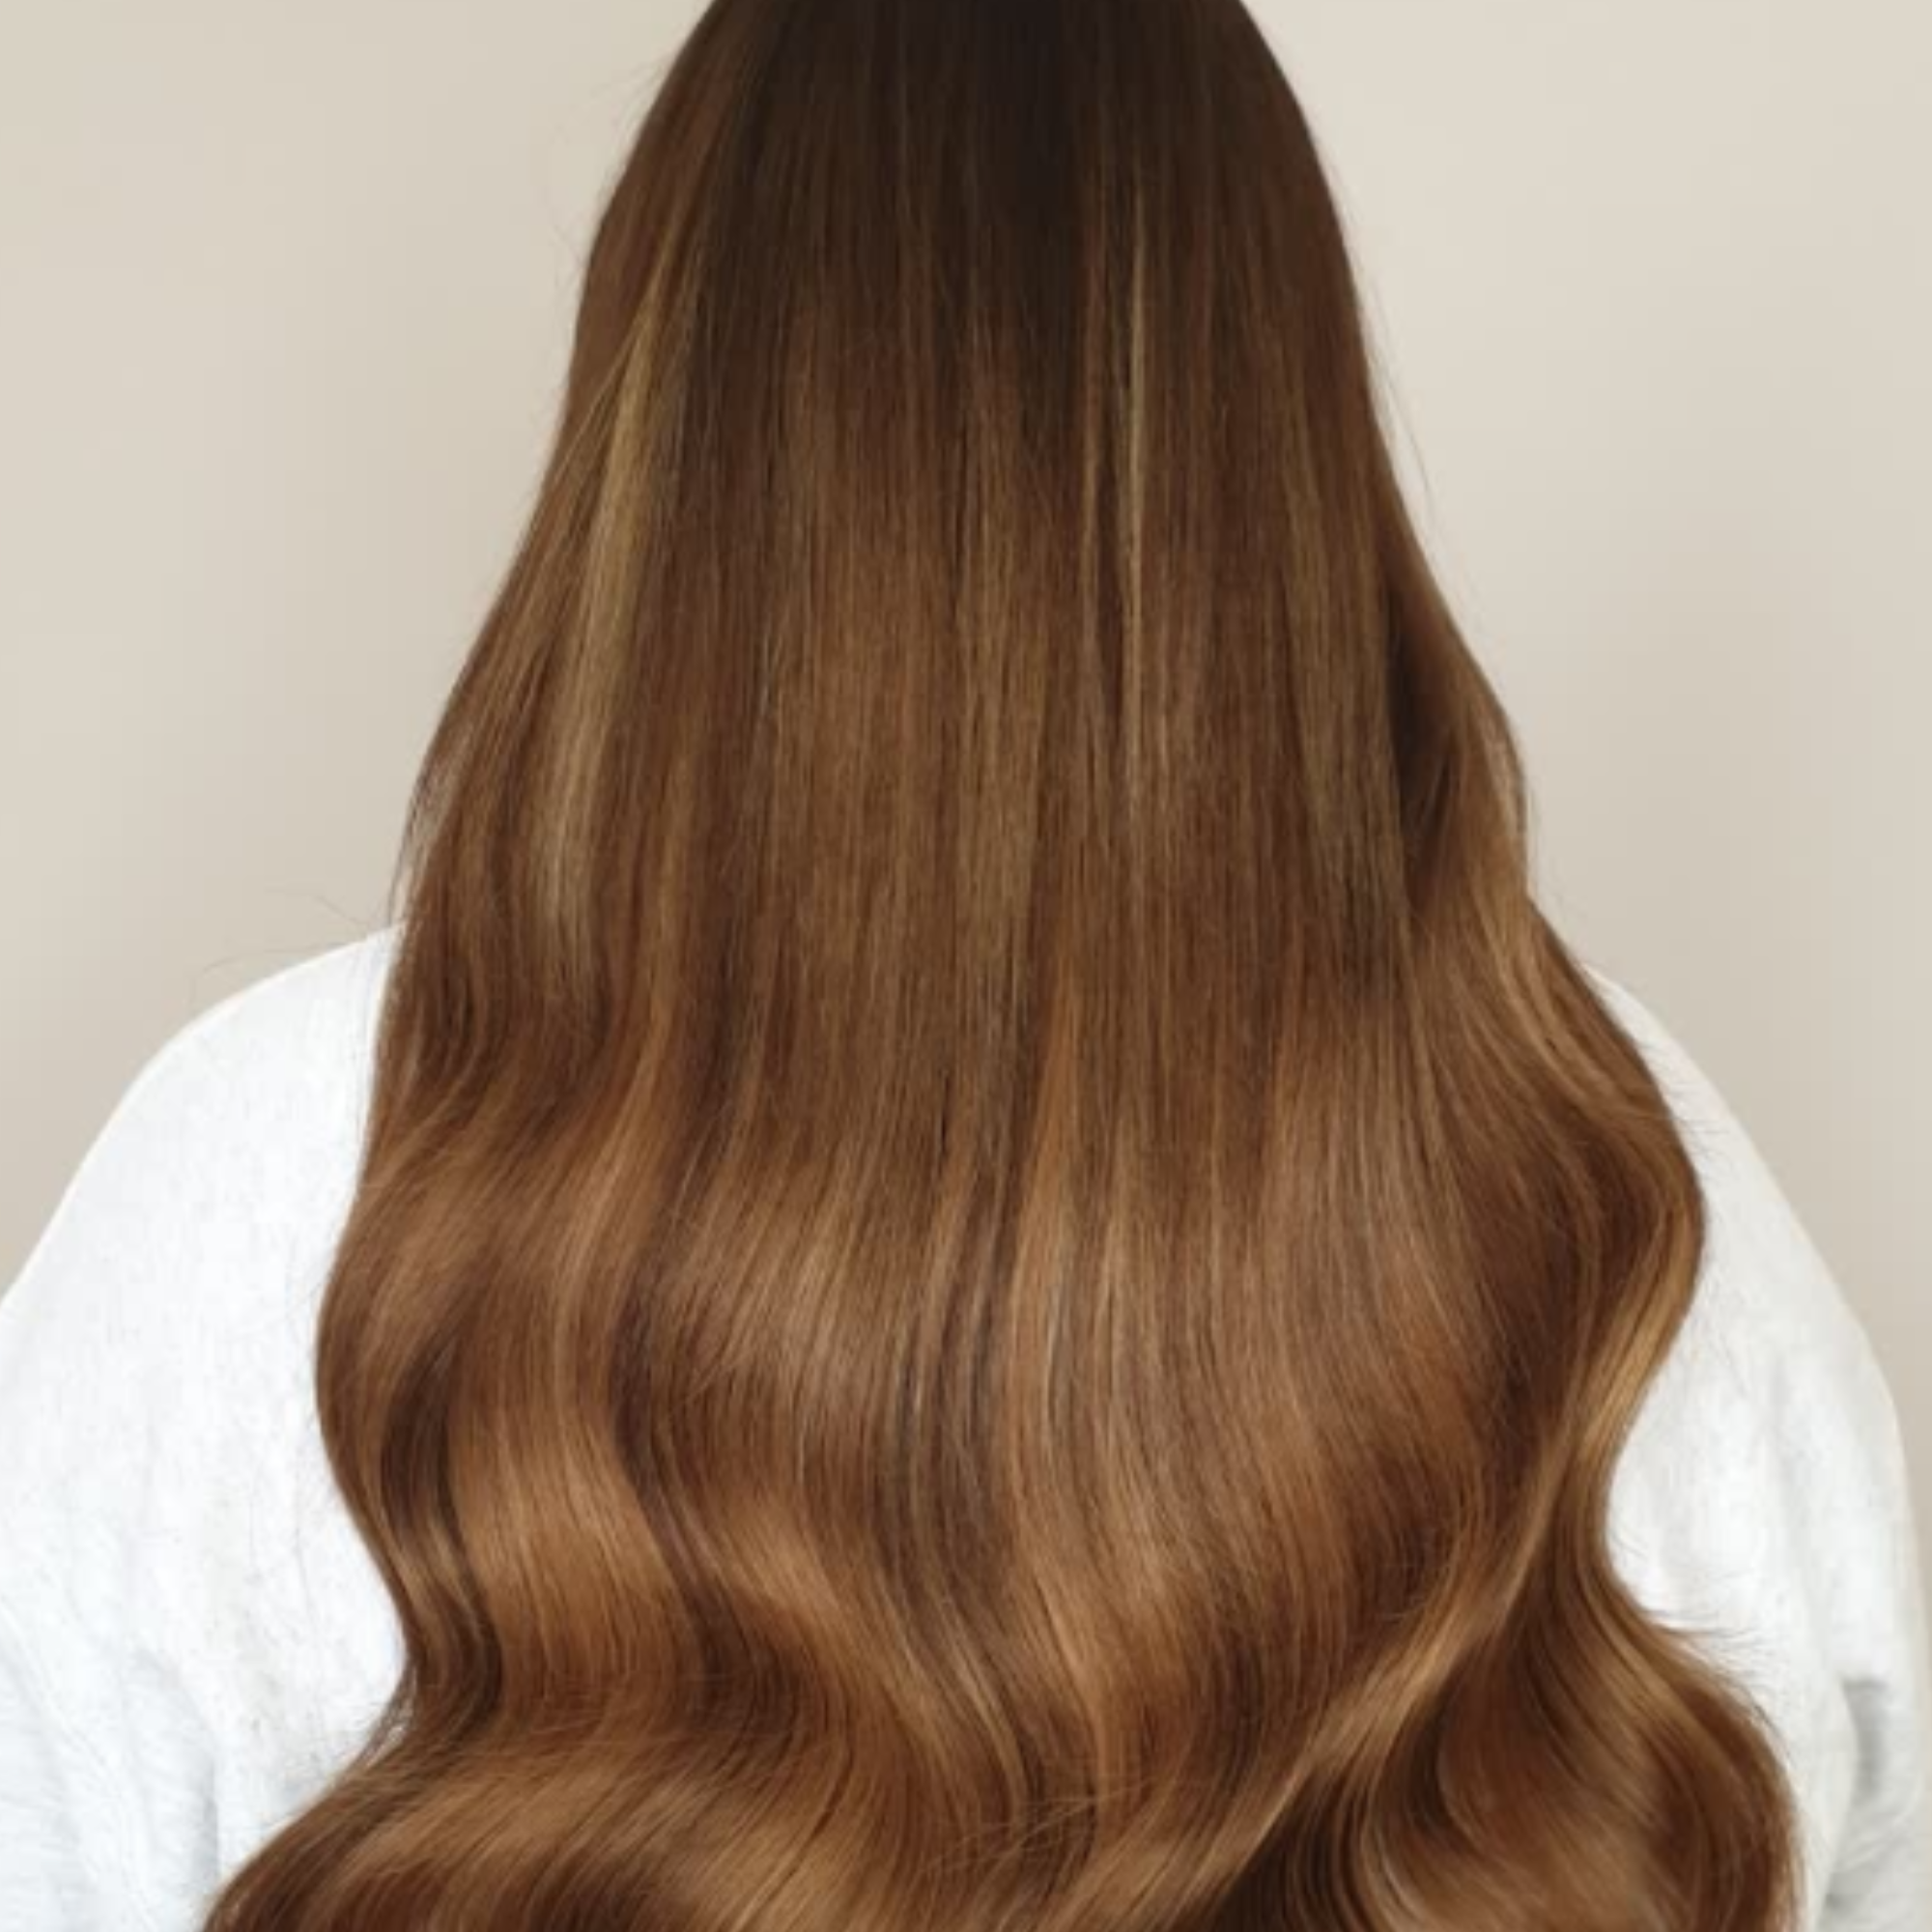 "hair rehab london 14" weft hair extensions shade swatch titled gorgeous gossip"